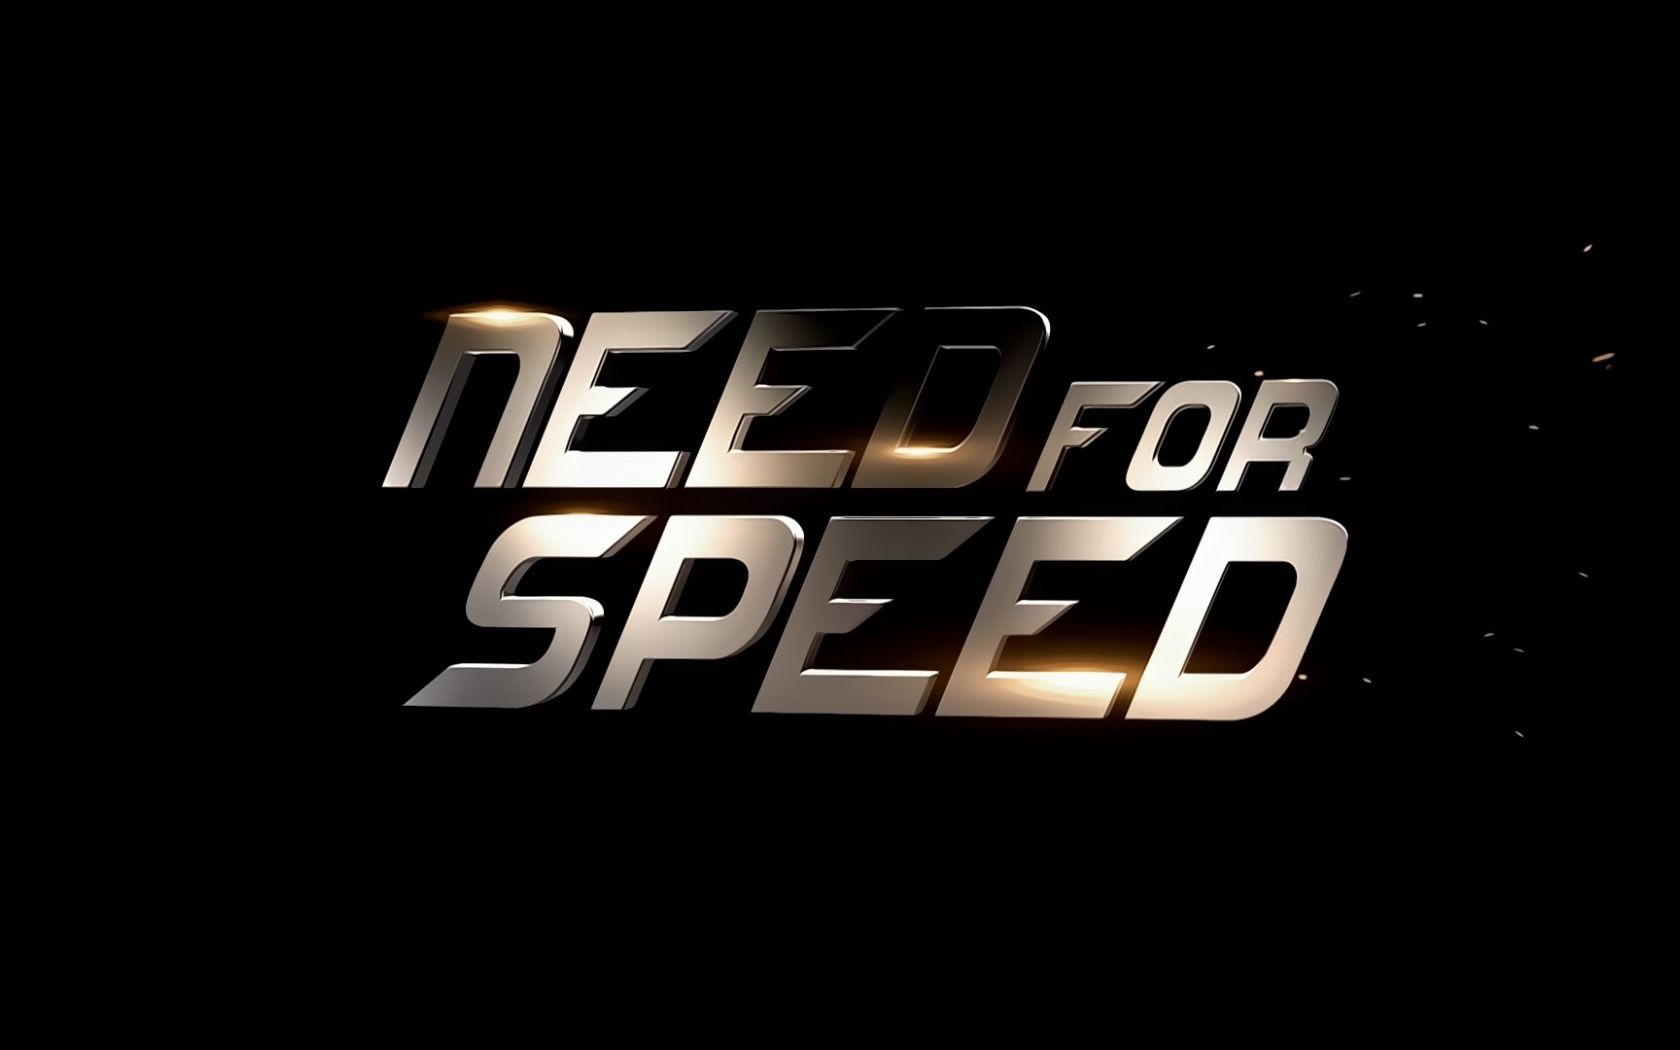 Need for Speed™ Hot Pursuit Remastered for Nintendo Switch - Nintendo  Official Site